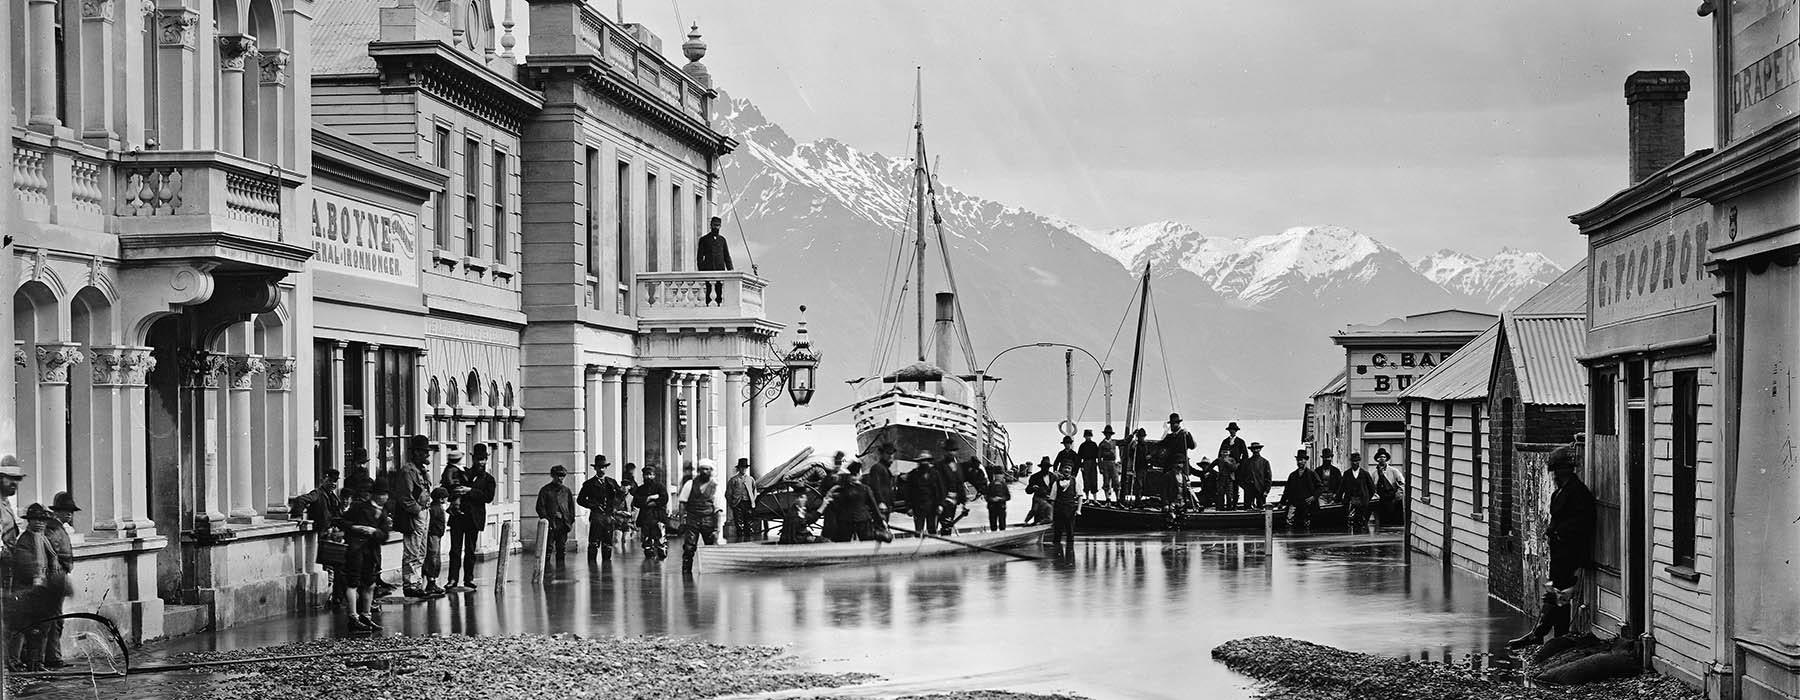 Photograph of Queenstown flooded in 1878